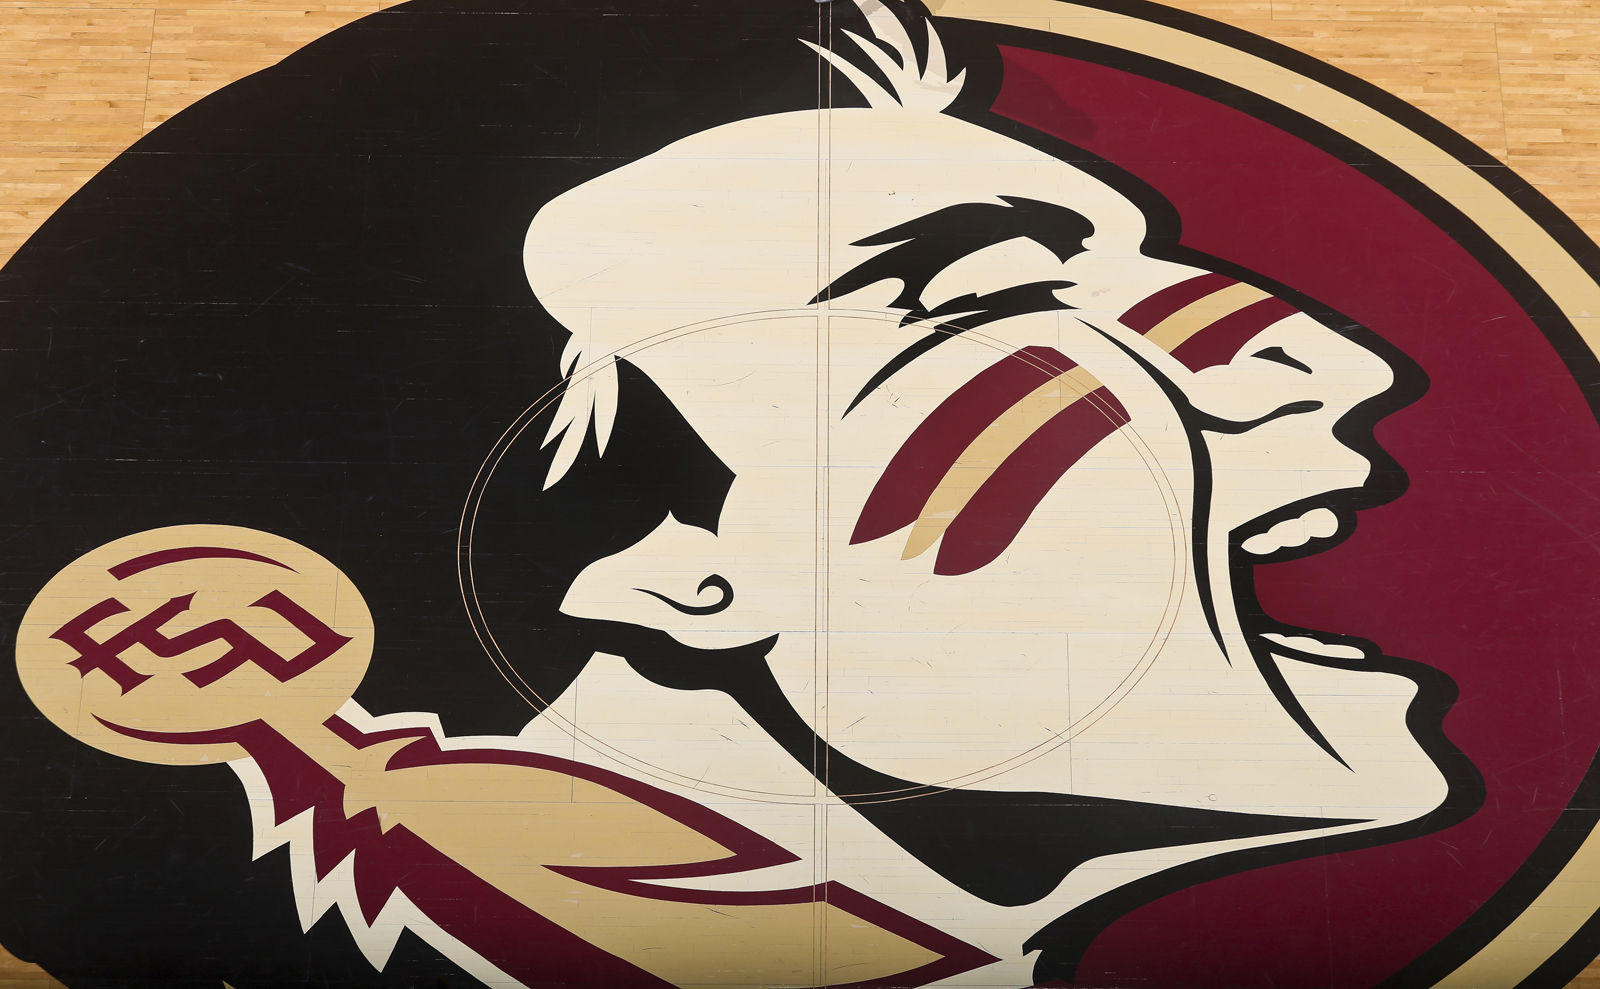 Some teams, like the Florida State Seminoles, have entered into agreements with Native American tribes they're named after to avoid controversy.

Florida State consults the Seminole tribe for any changes to its logo and has had an agreement with the tribe about using the logo and some traditions involving its mascot at football and basketball games. (AP Photo/Phil Sears)